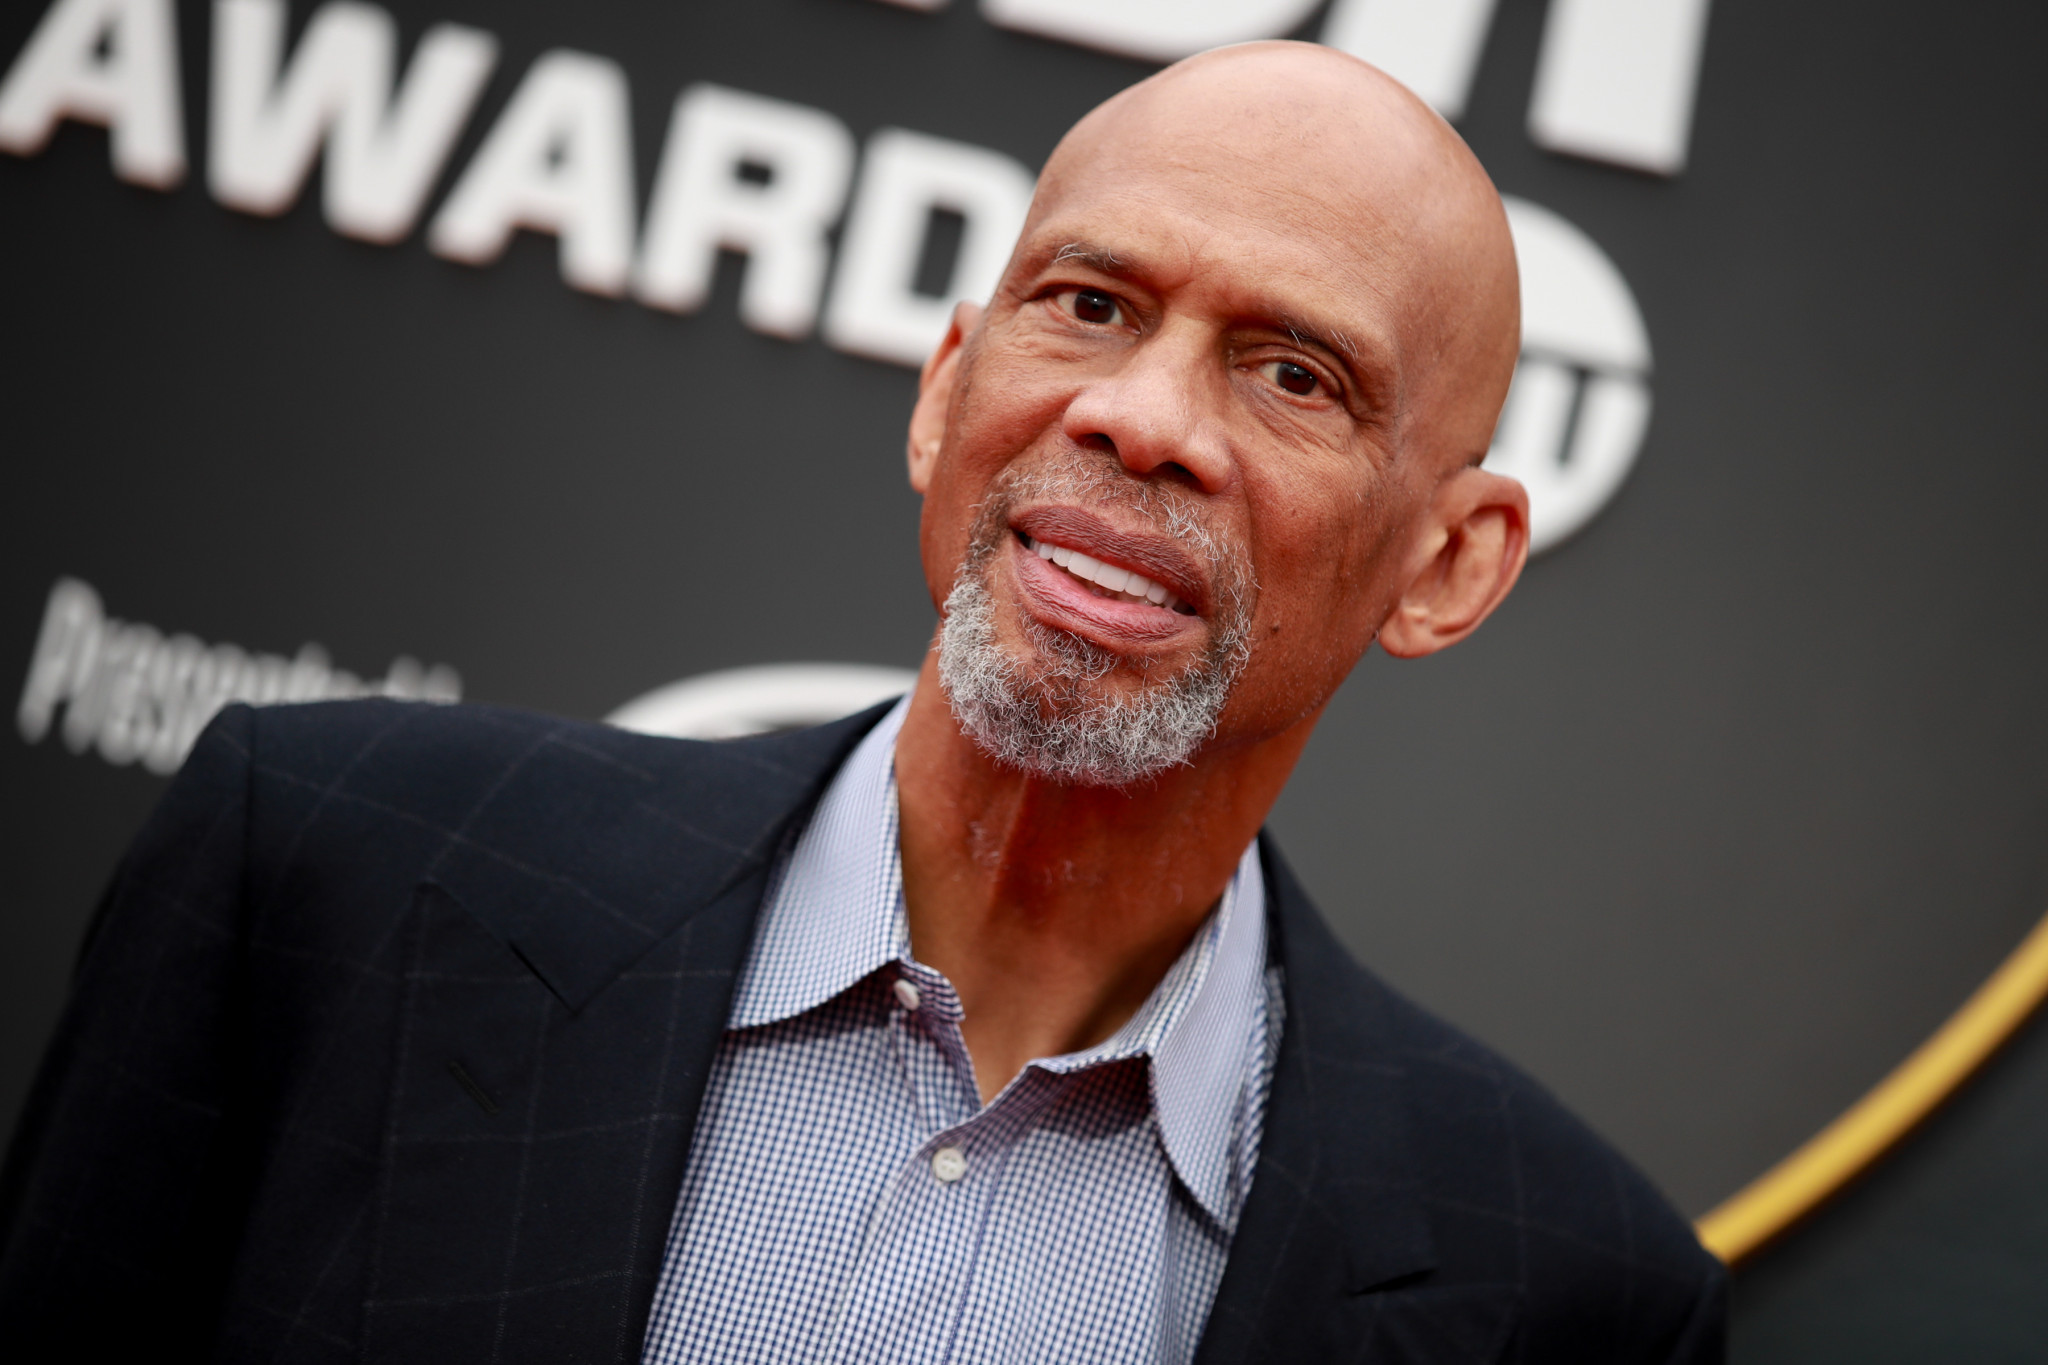 Kareem Abdul-Jabbar, a six-time NBA champion, thinks the league should crackdown on unvaccinated players ©Getty Images